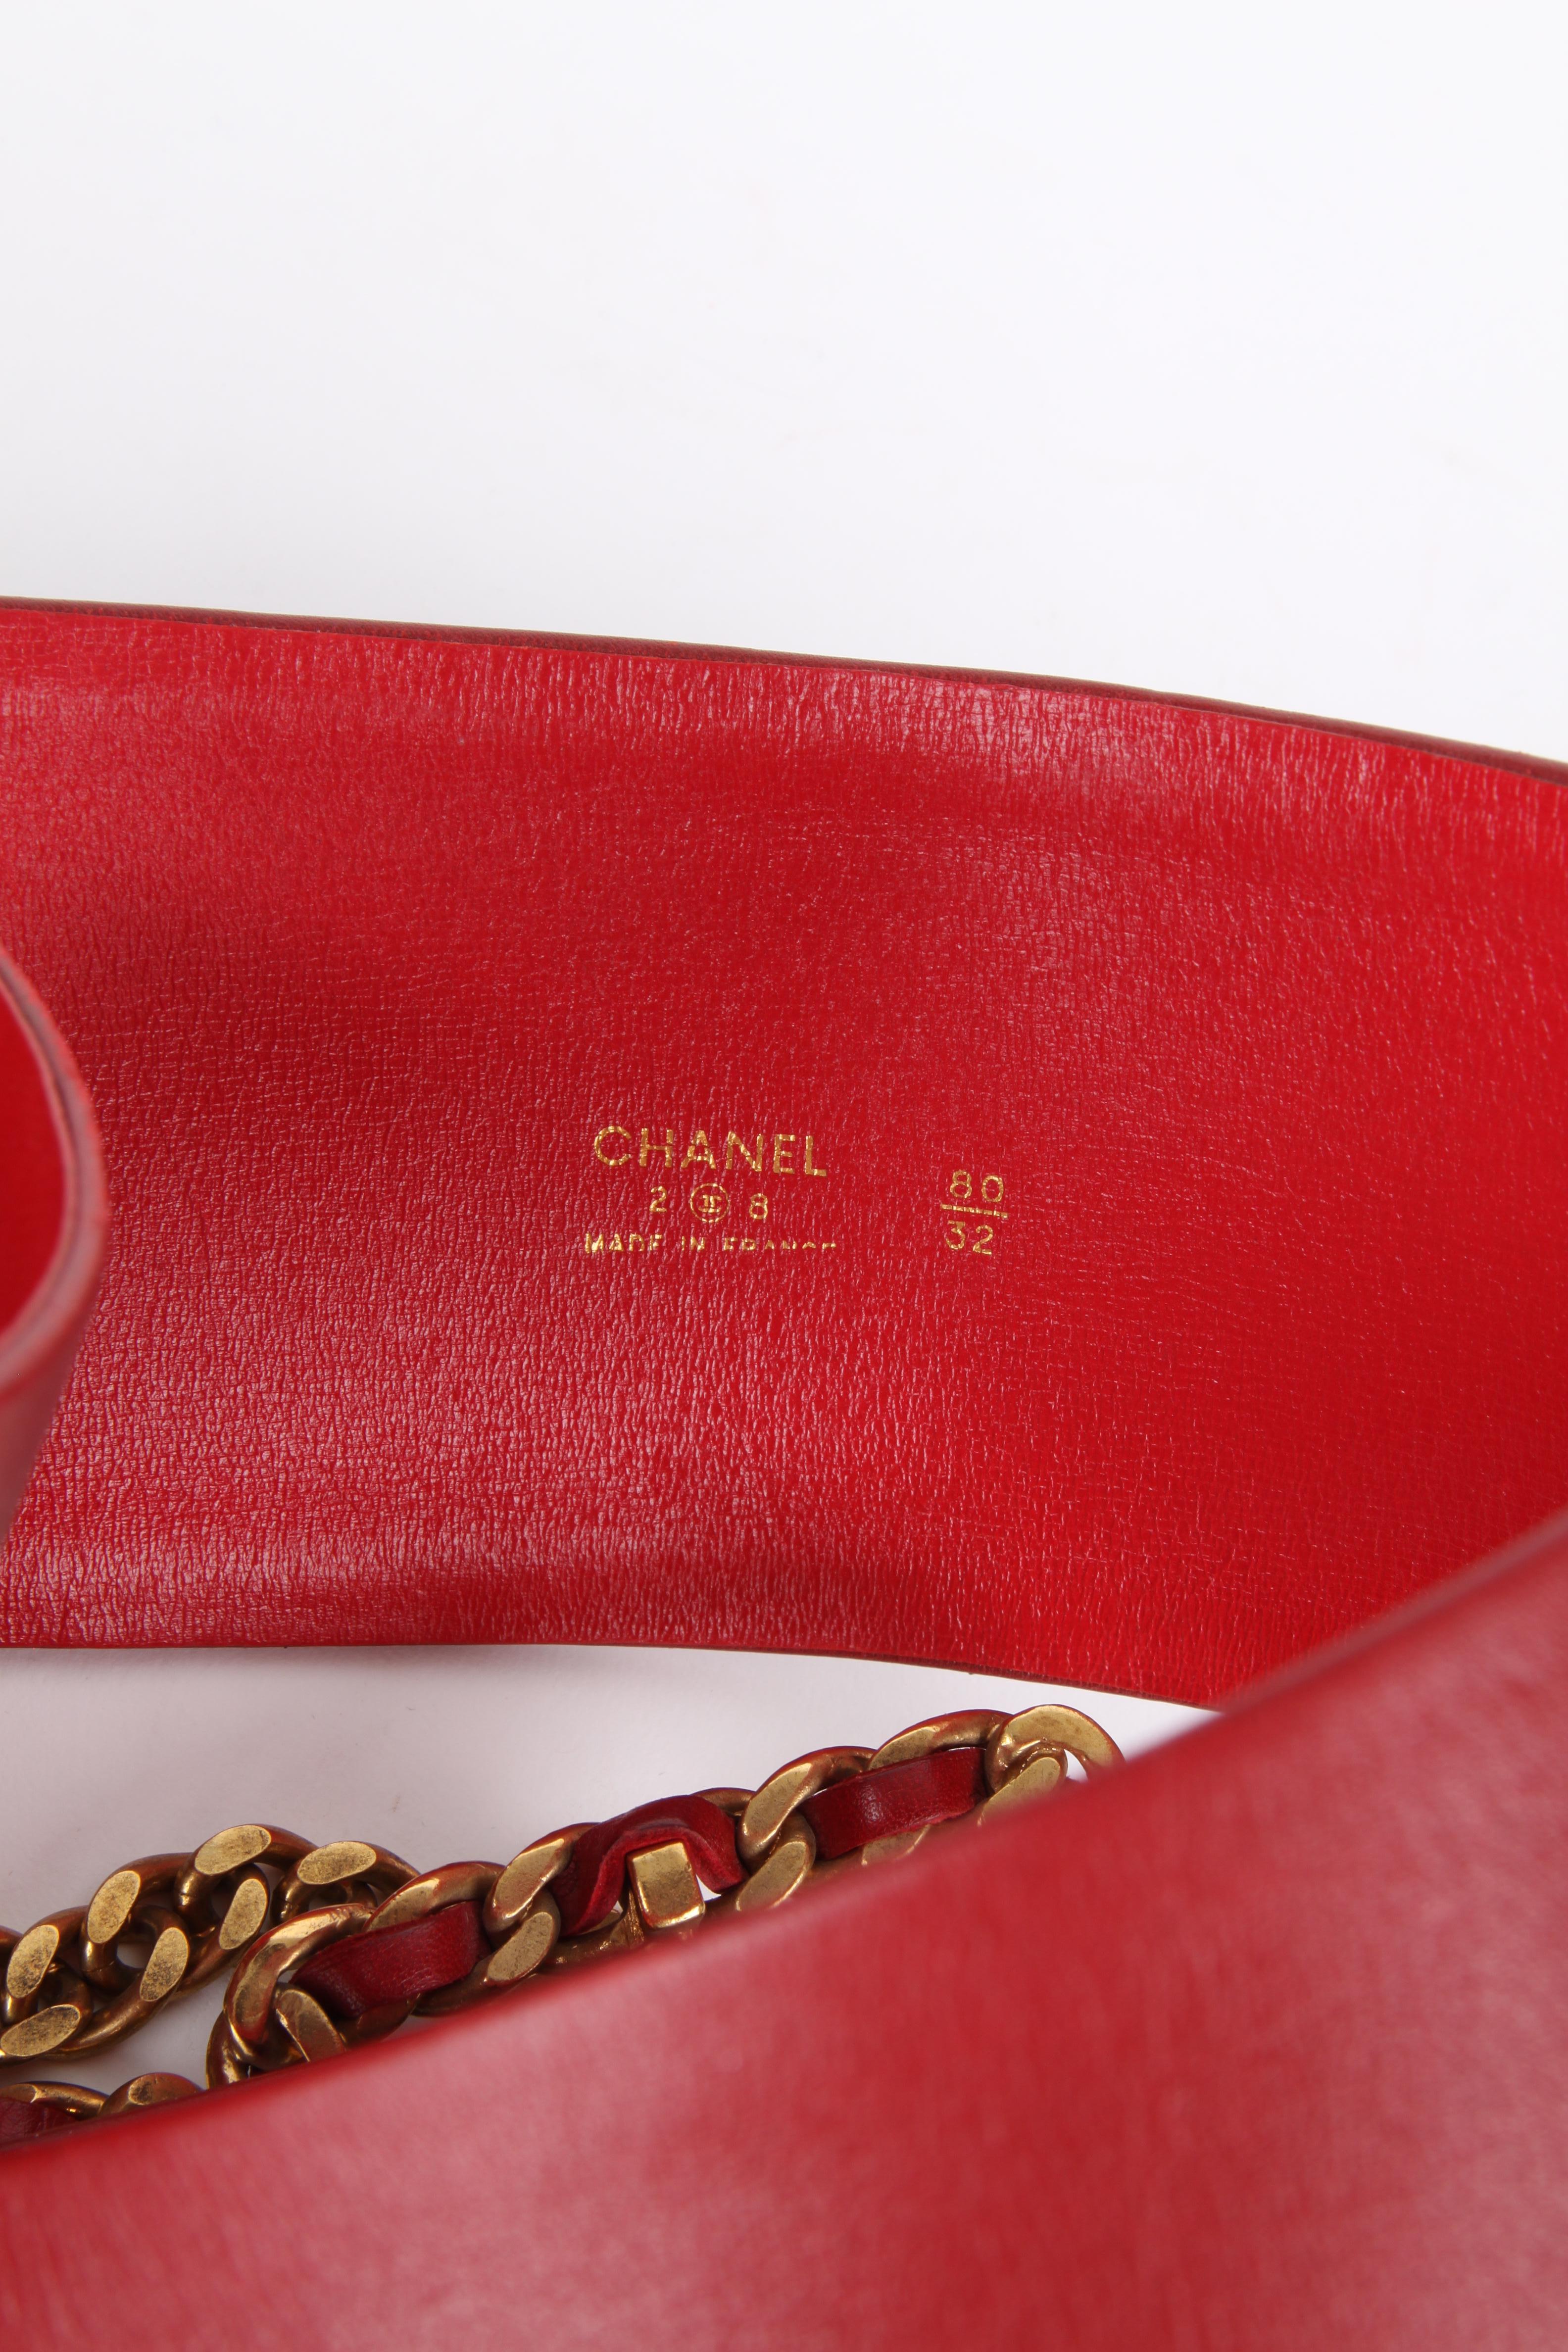 Chanel 1991 Wide Long Chain Medallion Red Leather Belt For Sale 4